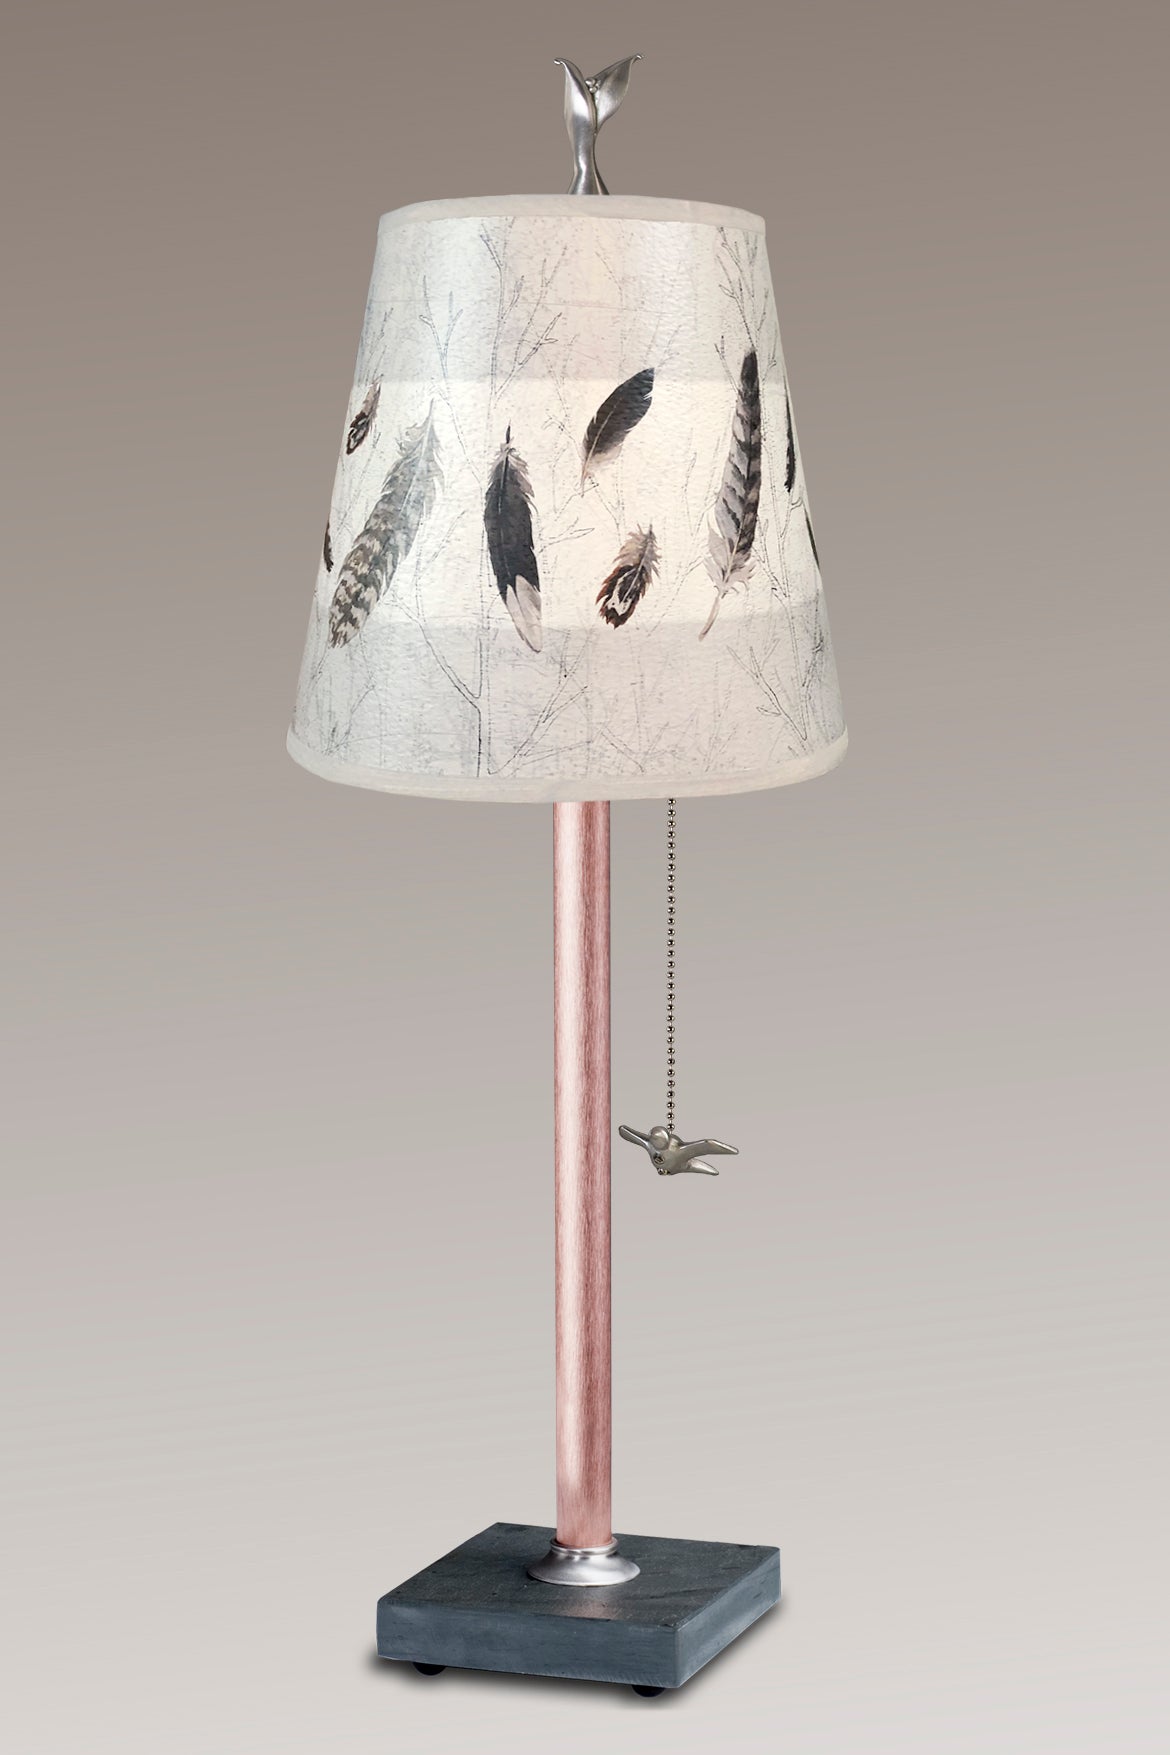 Janna Ugone &amp; Co Table Lamps Copper Table Lamp with Small Drum in Feathers in Pebble